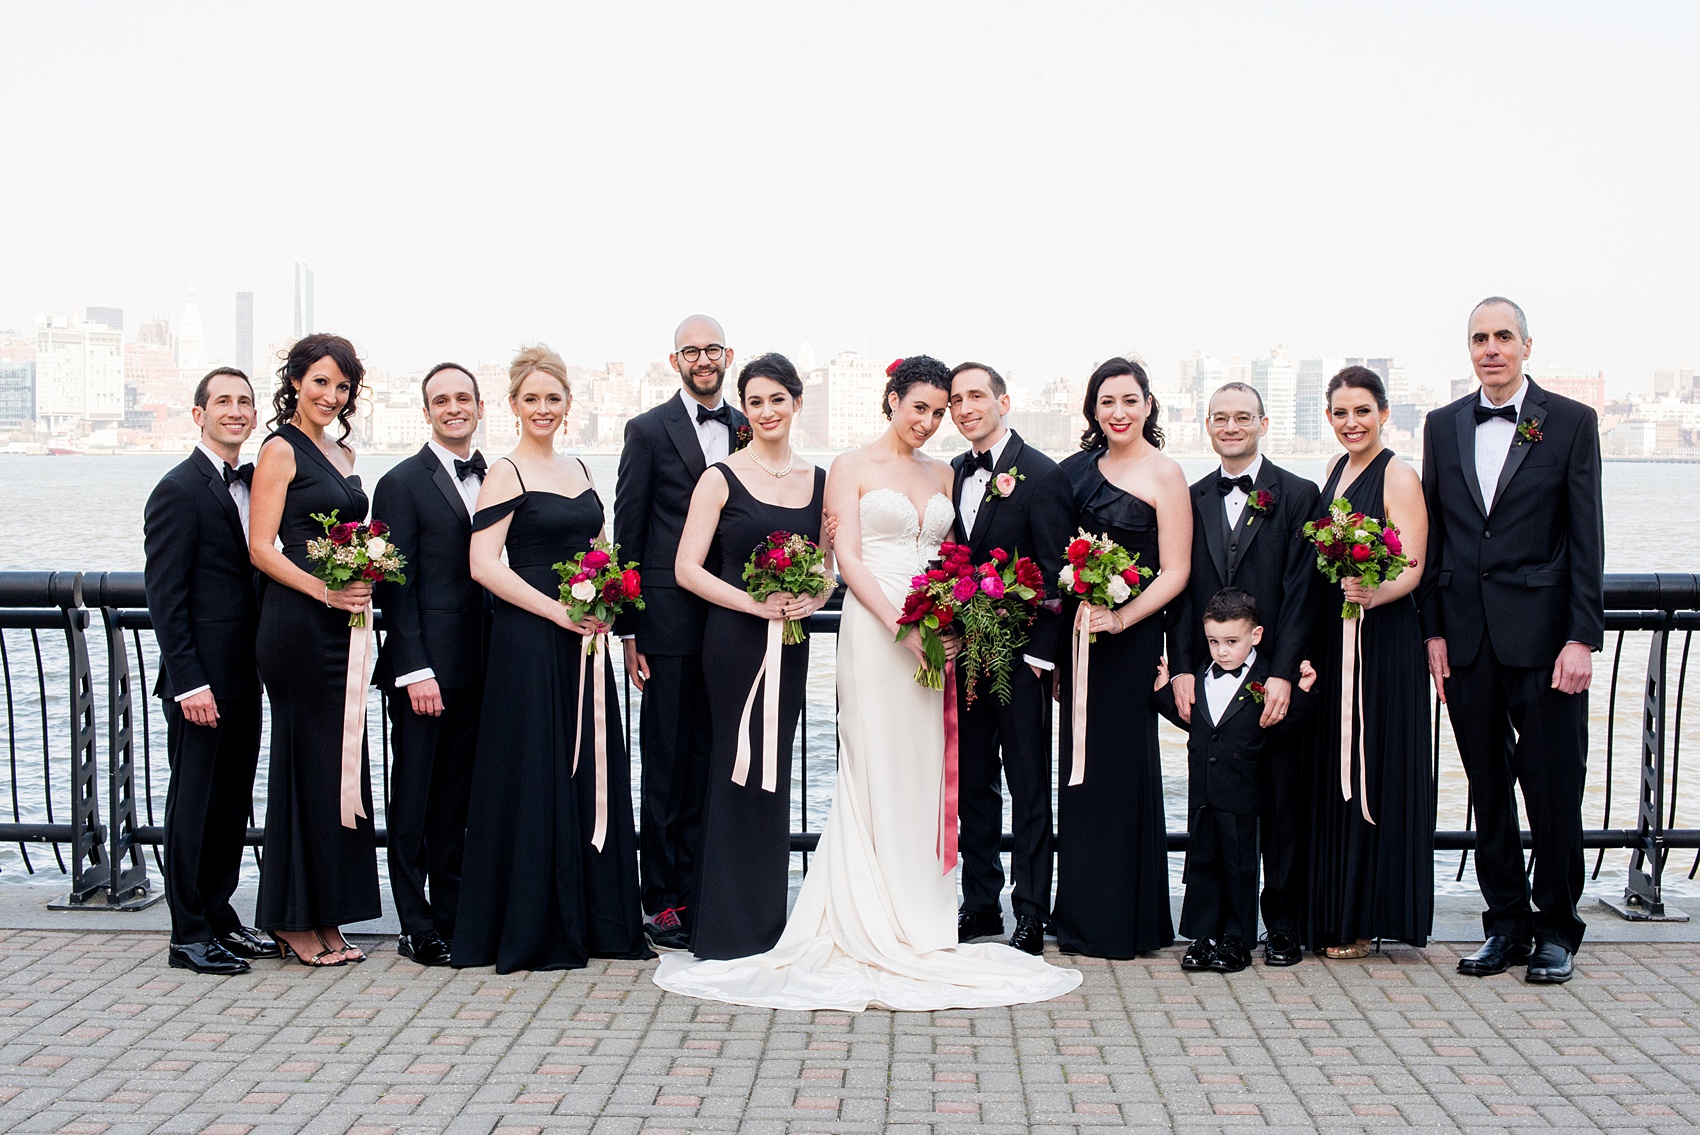 W Hoboken wedding photos at this New Jersey hotel overlooking the NYC skyline. Photos by Mikkel Paige Photography of the bridal party in black gowns carrying romantic bouquets in red and pink and groomsmen in black tuxedos. #mikkelpaige #HobokenWedding #NewJerseyPhotographer #NewYorkCityPhotographer #NYCweddingphotographer #brideandgroomphotos #redpeonies #romanticwedding #springwedding #CityWedding